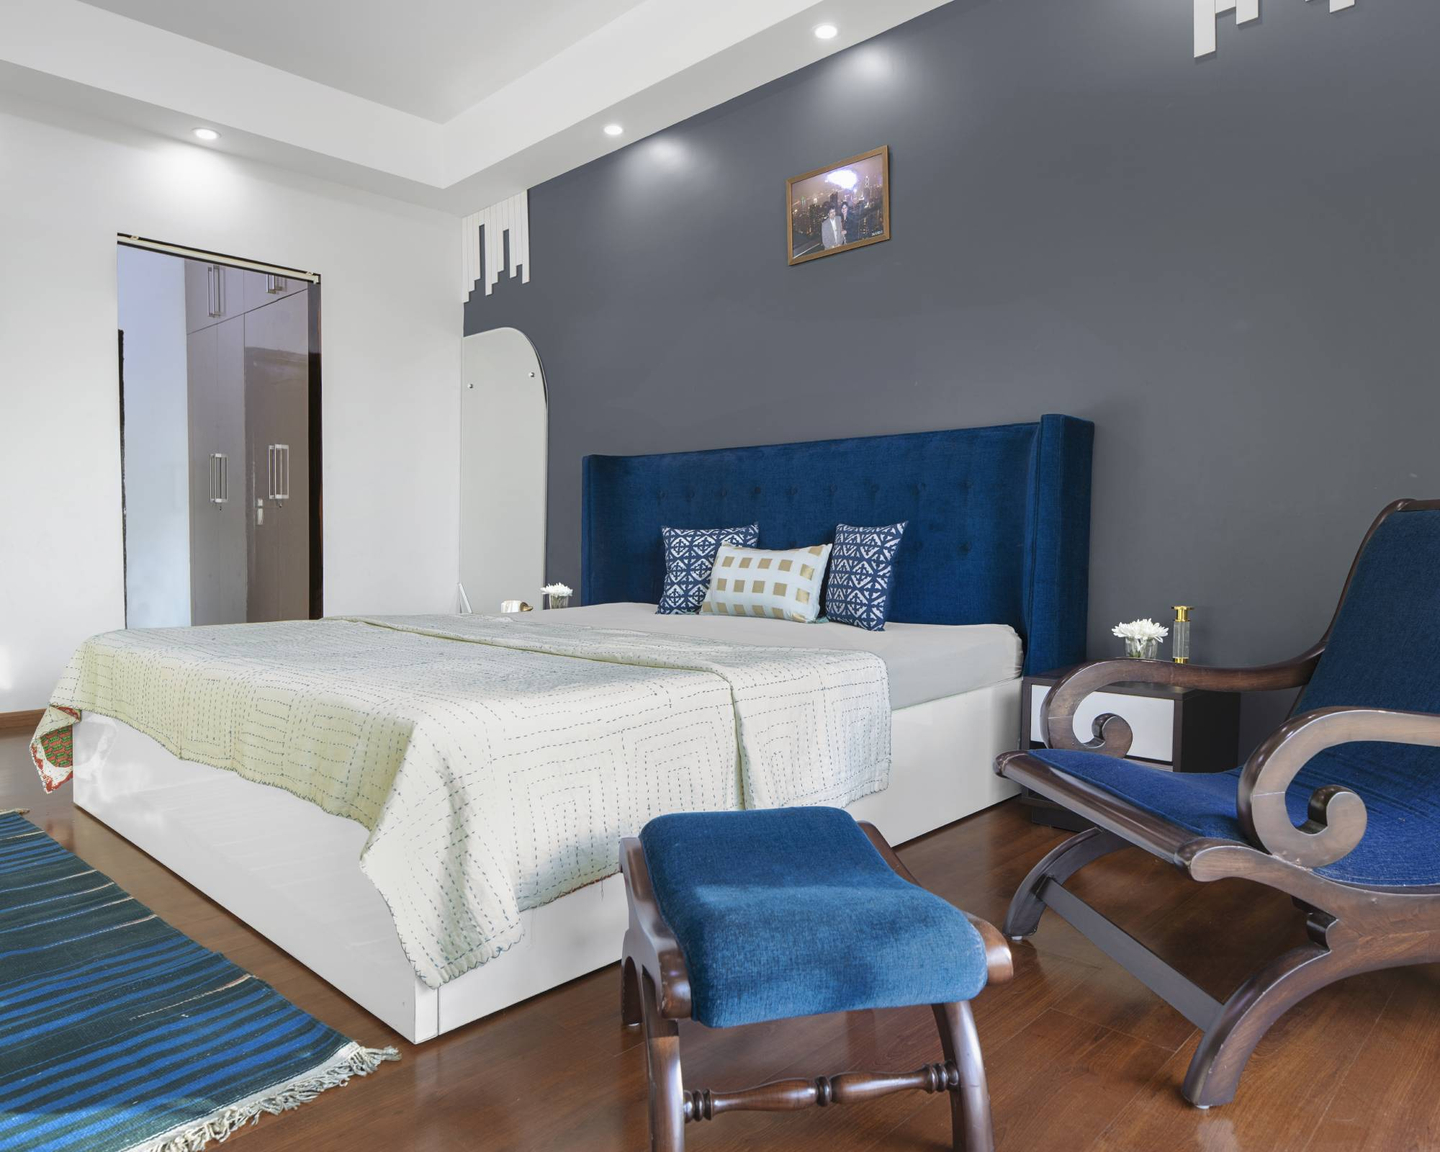 Modern Guest Room Design With Blue Accent Chair And Pouffe